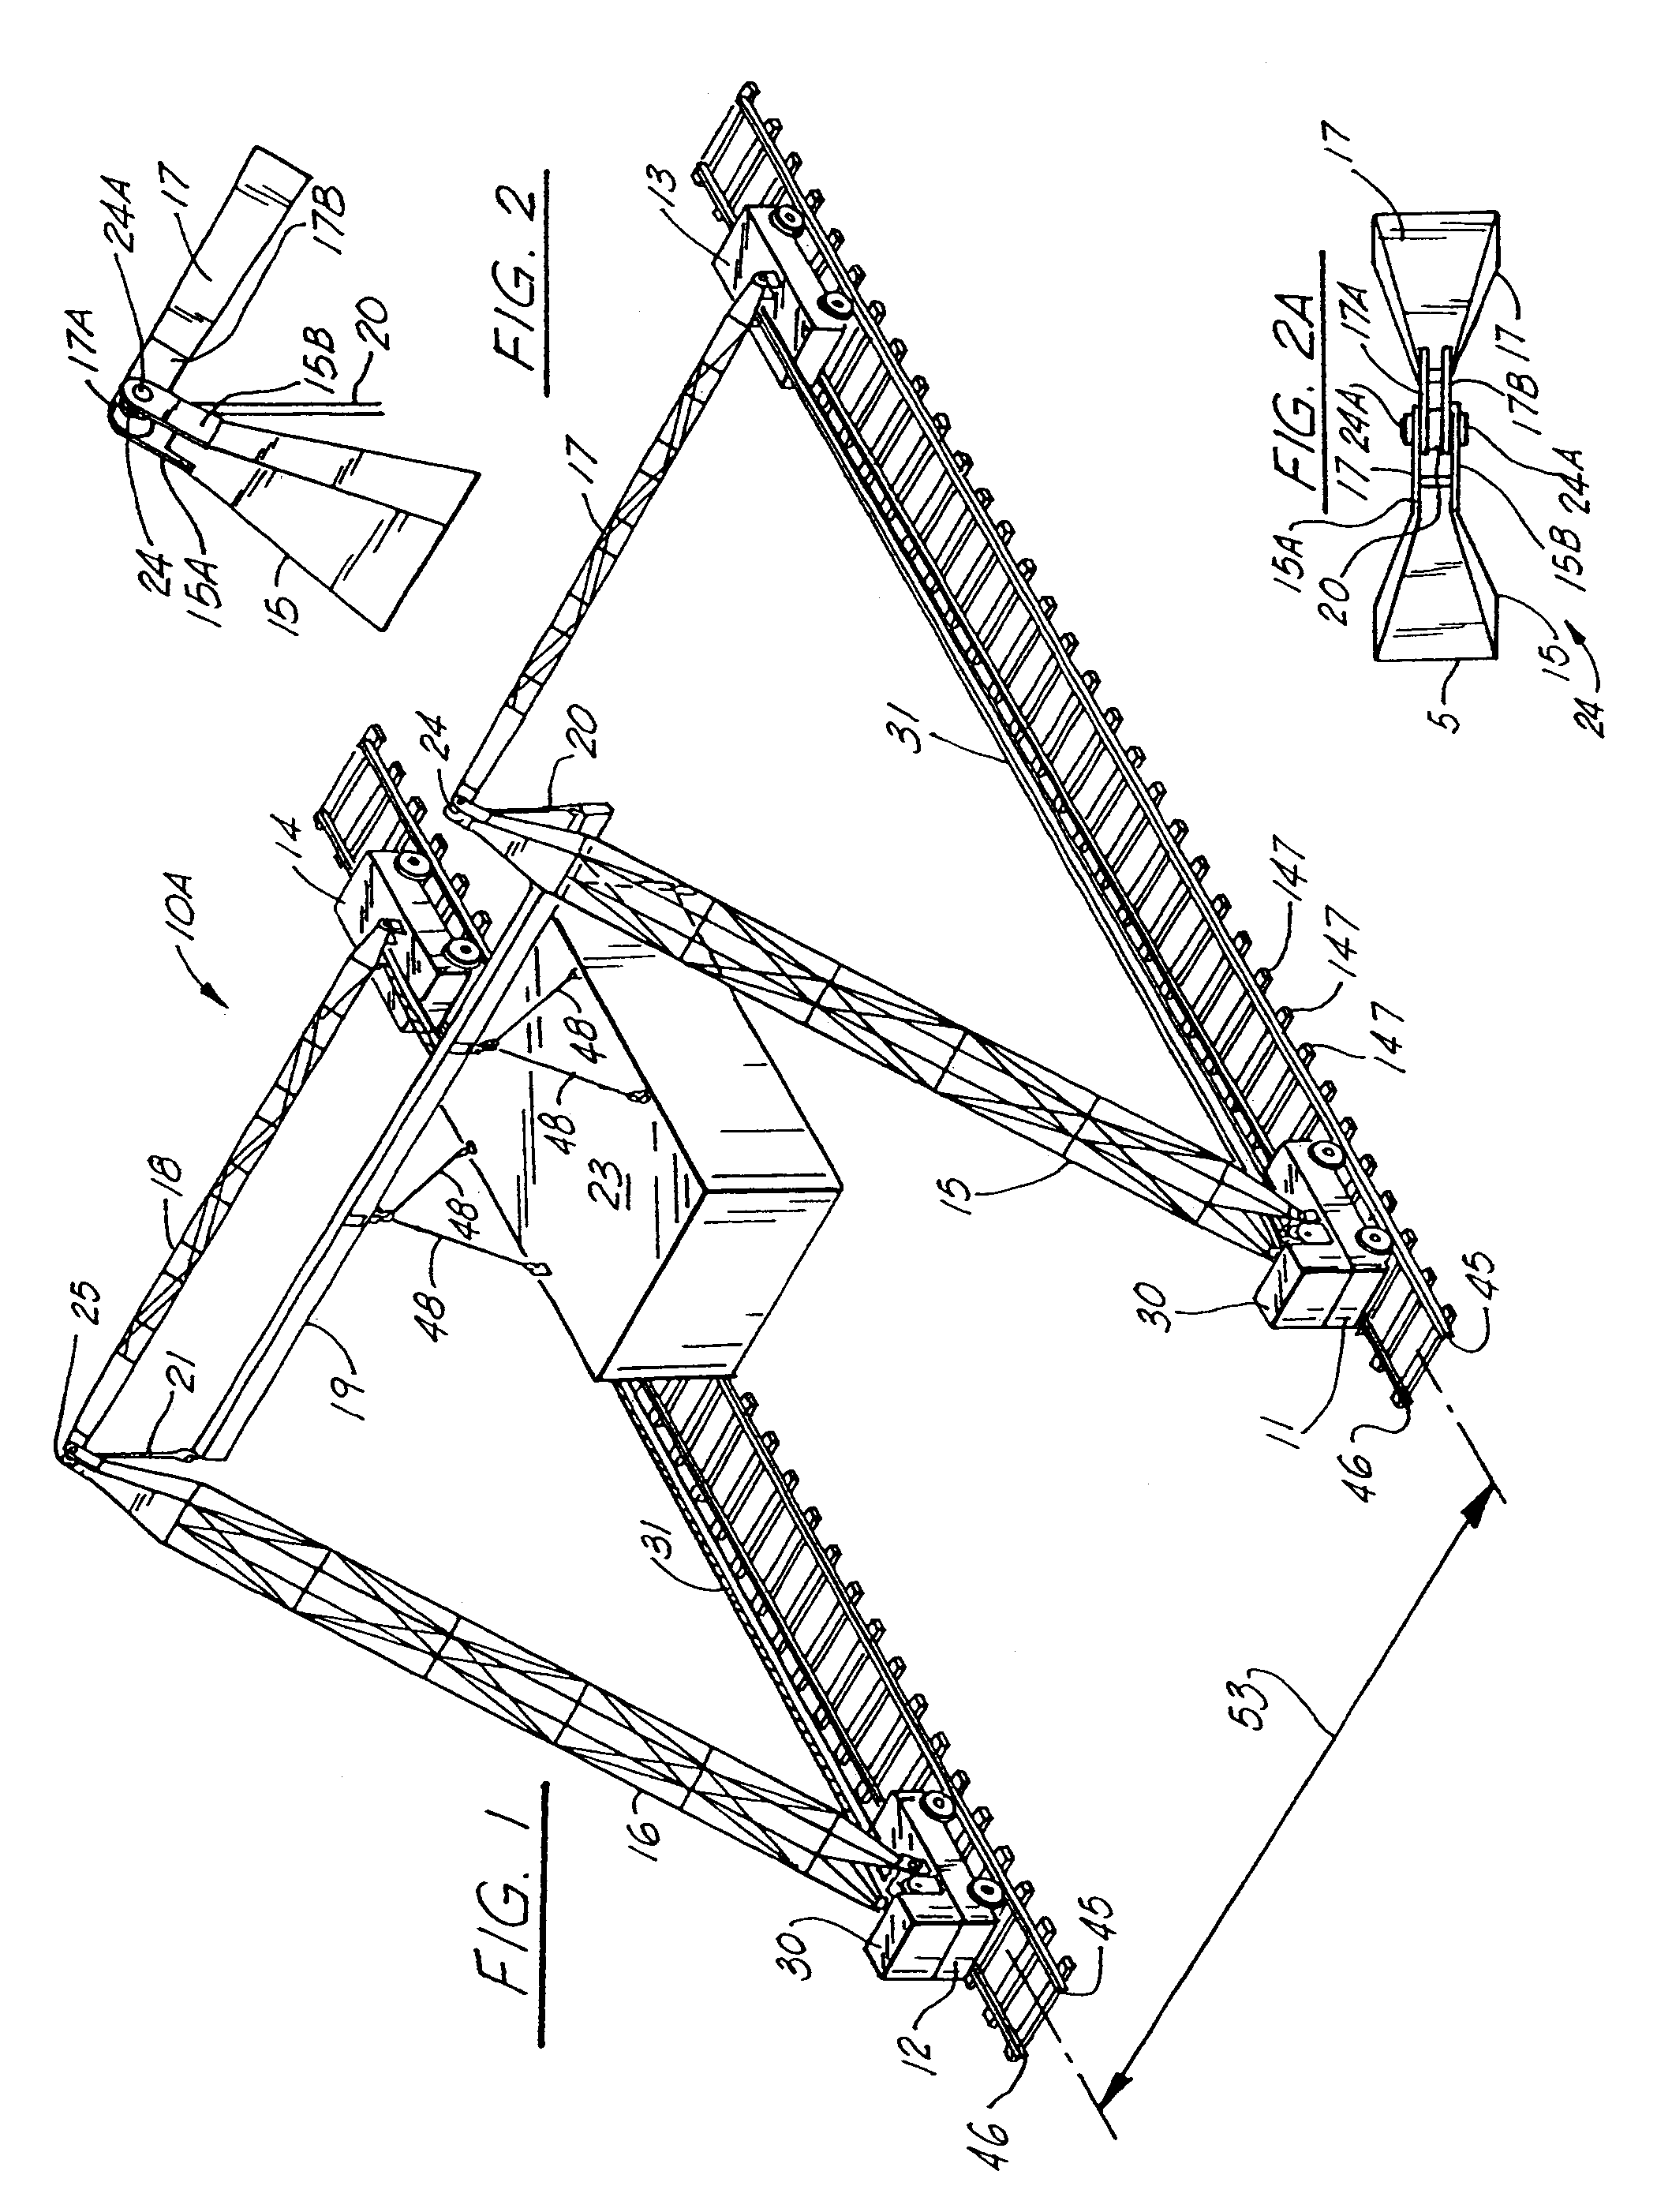 Powered lifting apparatus using multiple booms